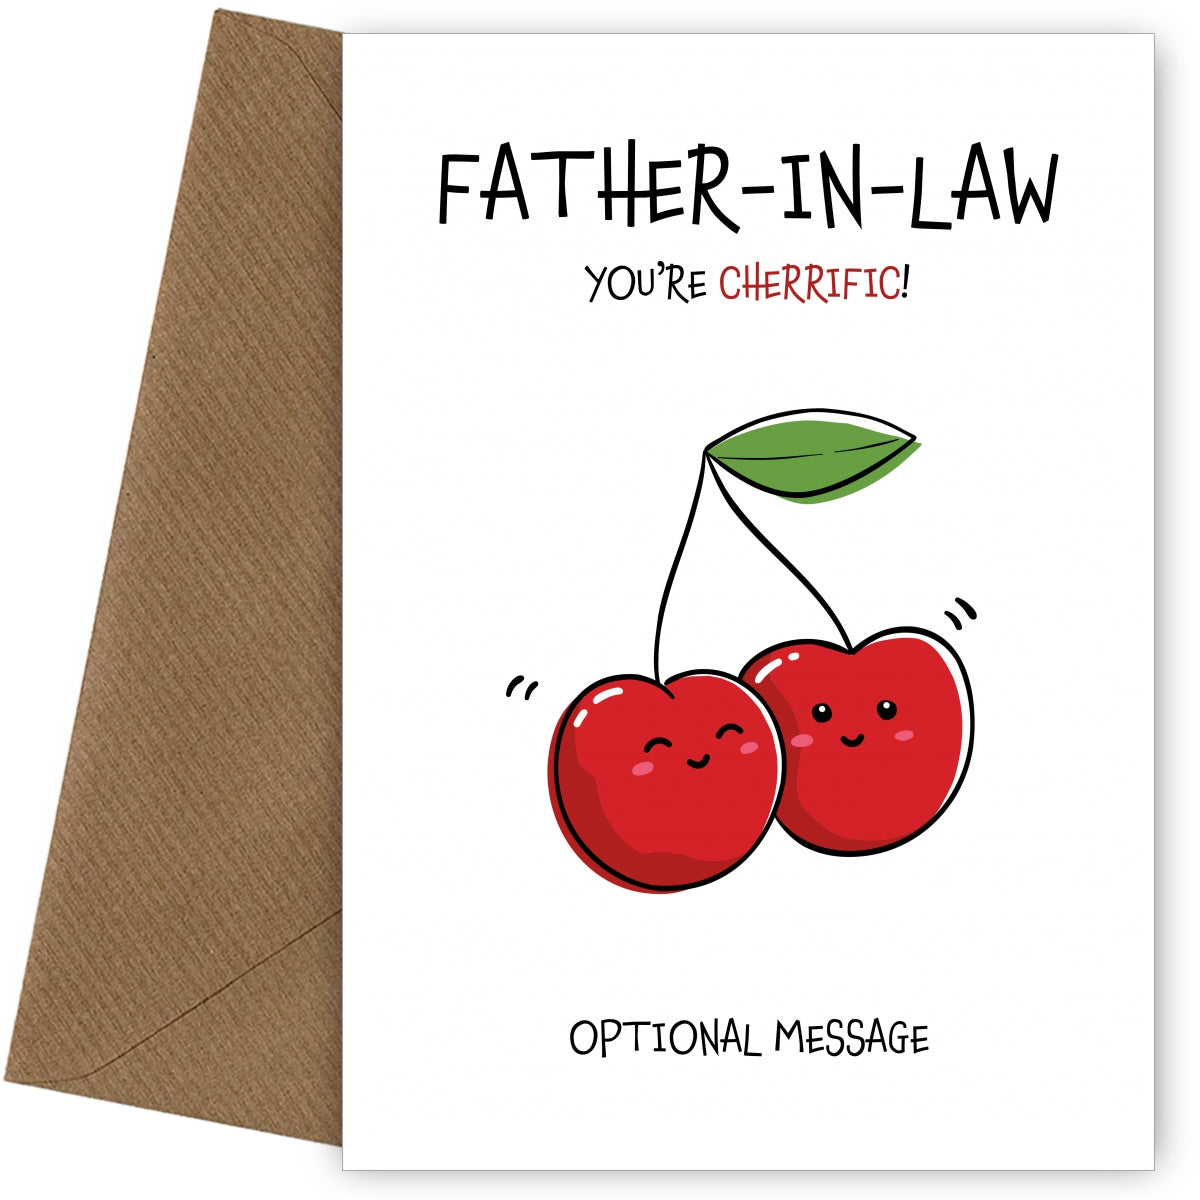 Father-in-law You're Cherrific Fruit Pun Birthday Card